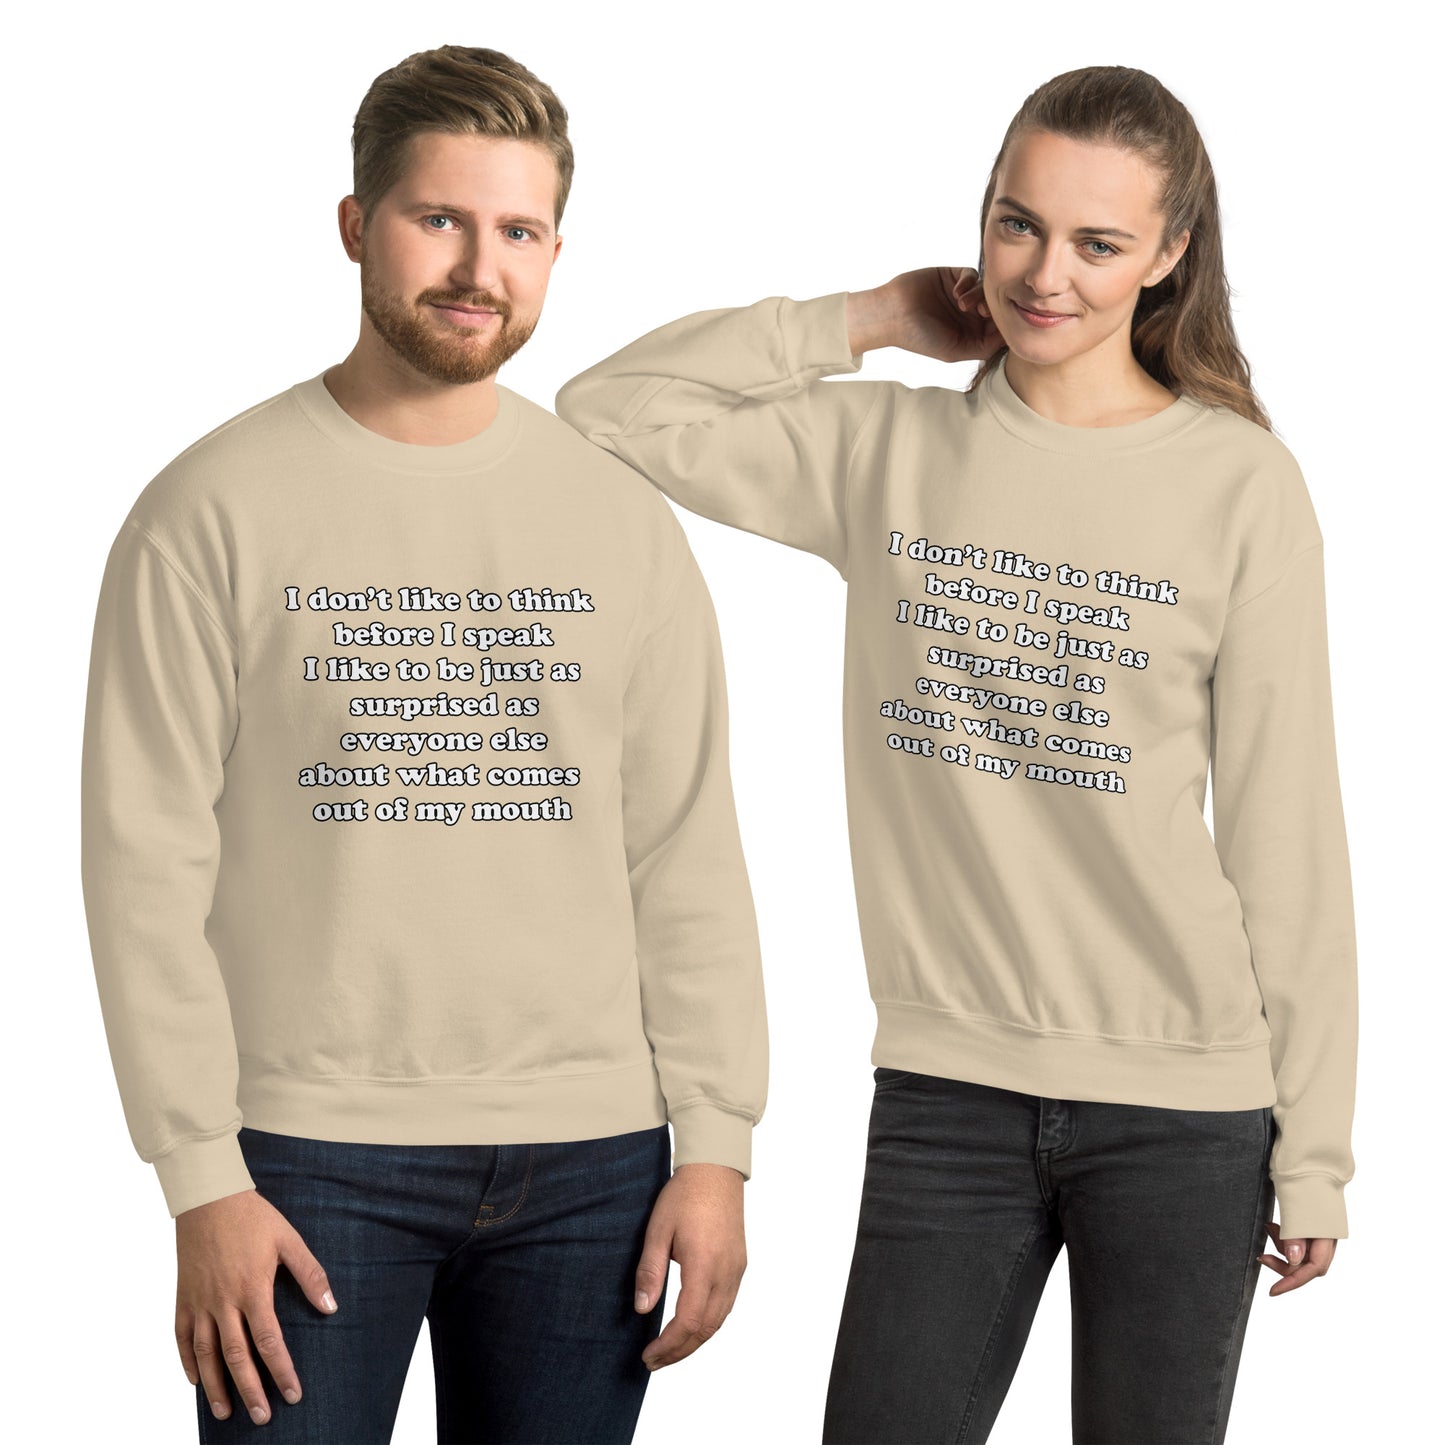 Man and woman with sand sweatshirt with text “I don't think before I speak Just as serprised as everyone about what comes out of my mouth"